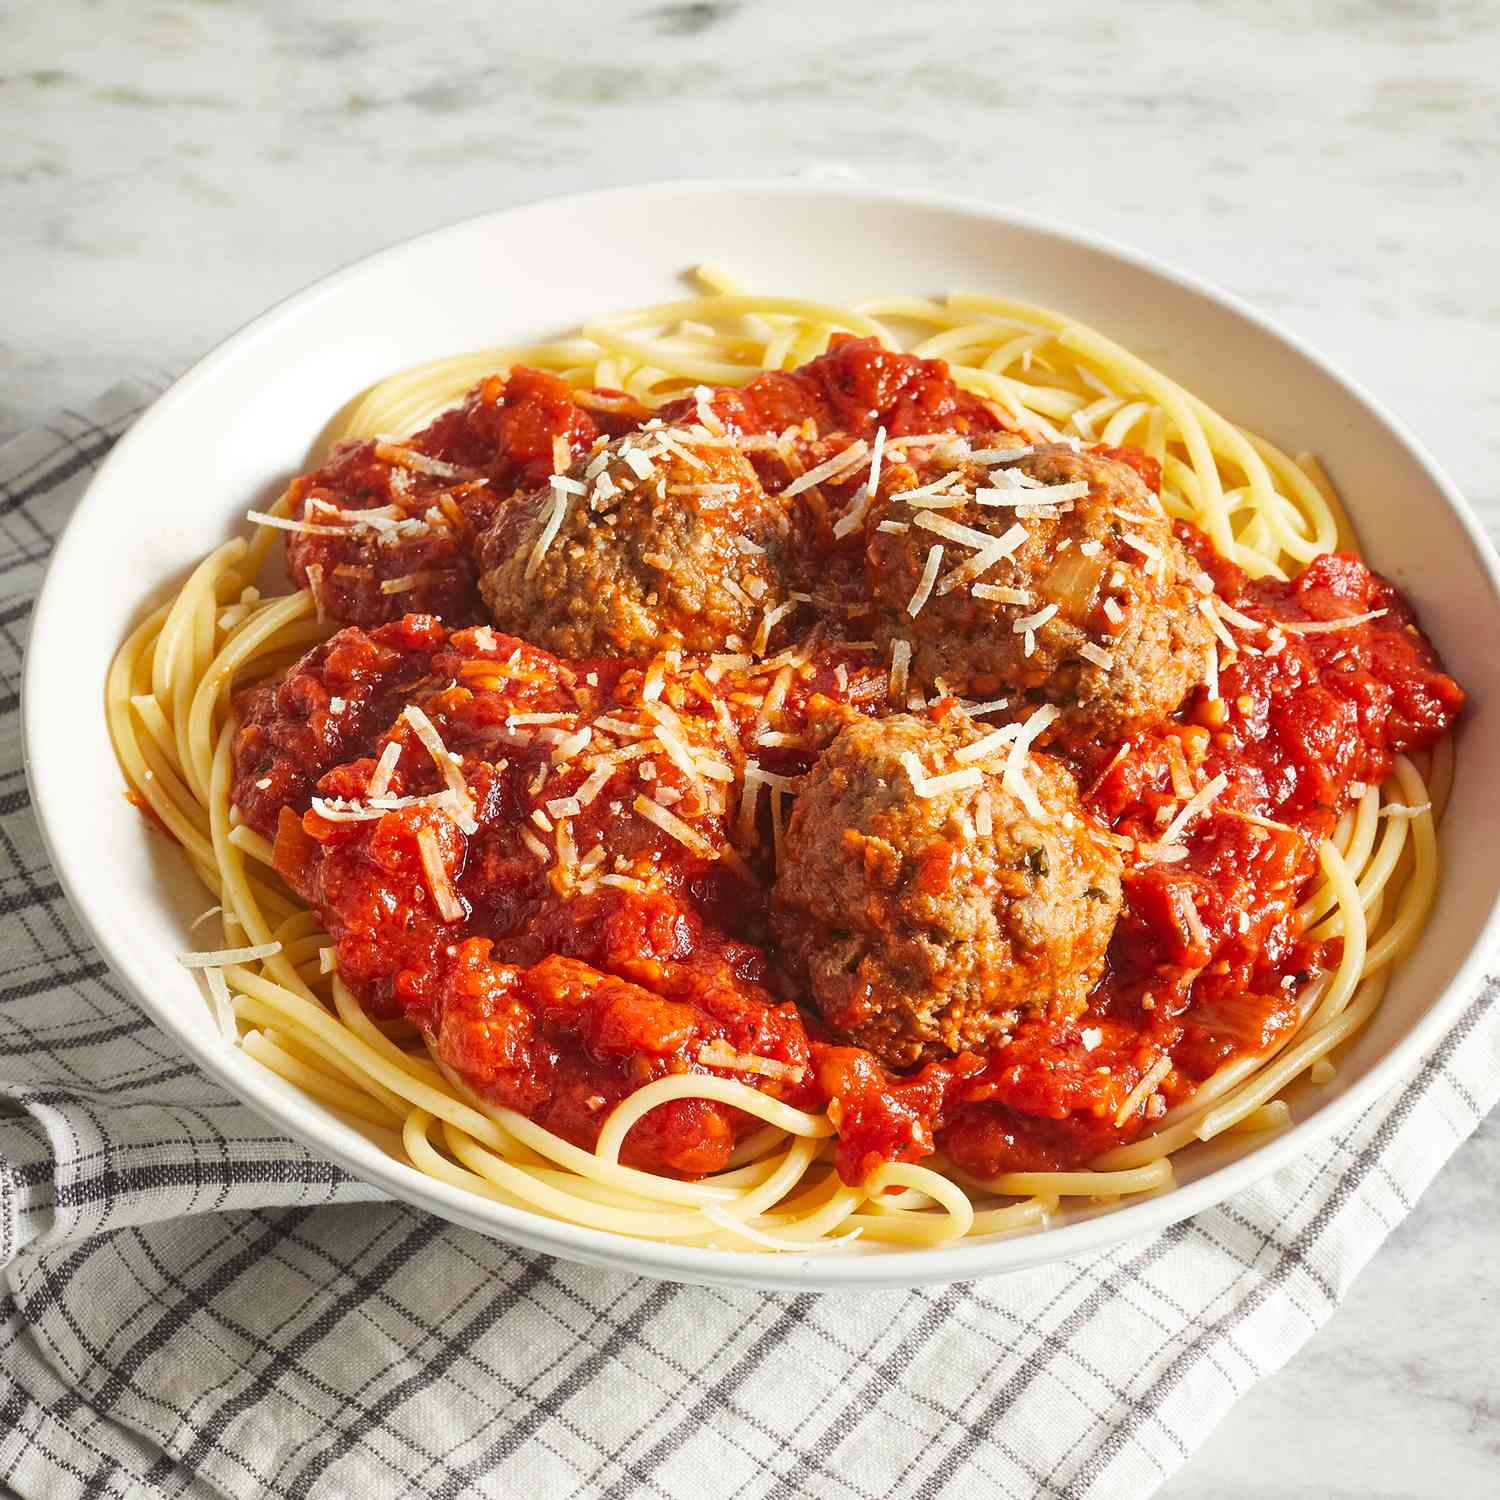 Our 10 Best Italian Meatball Recipes for All Your Spaghetti Dinner Needs